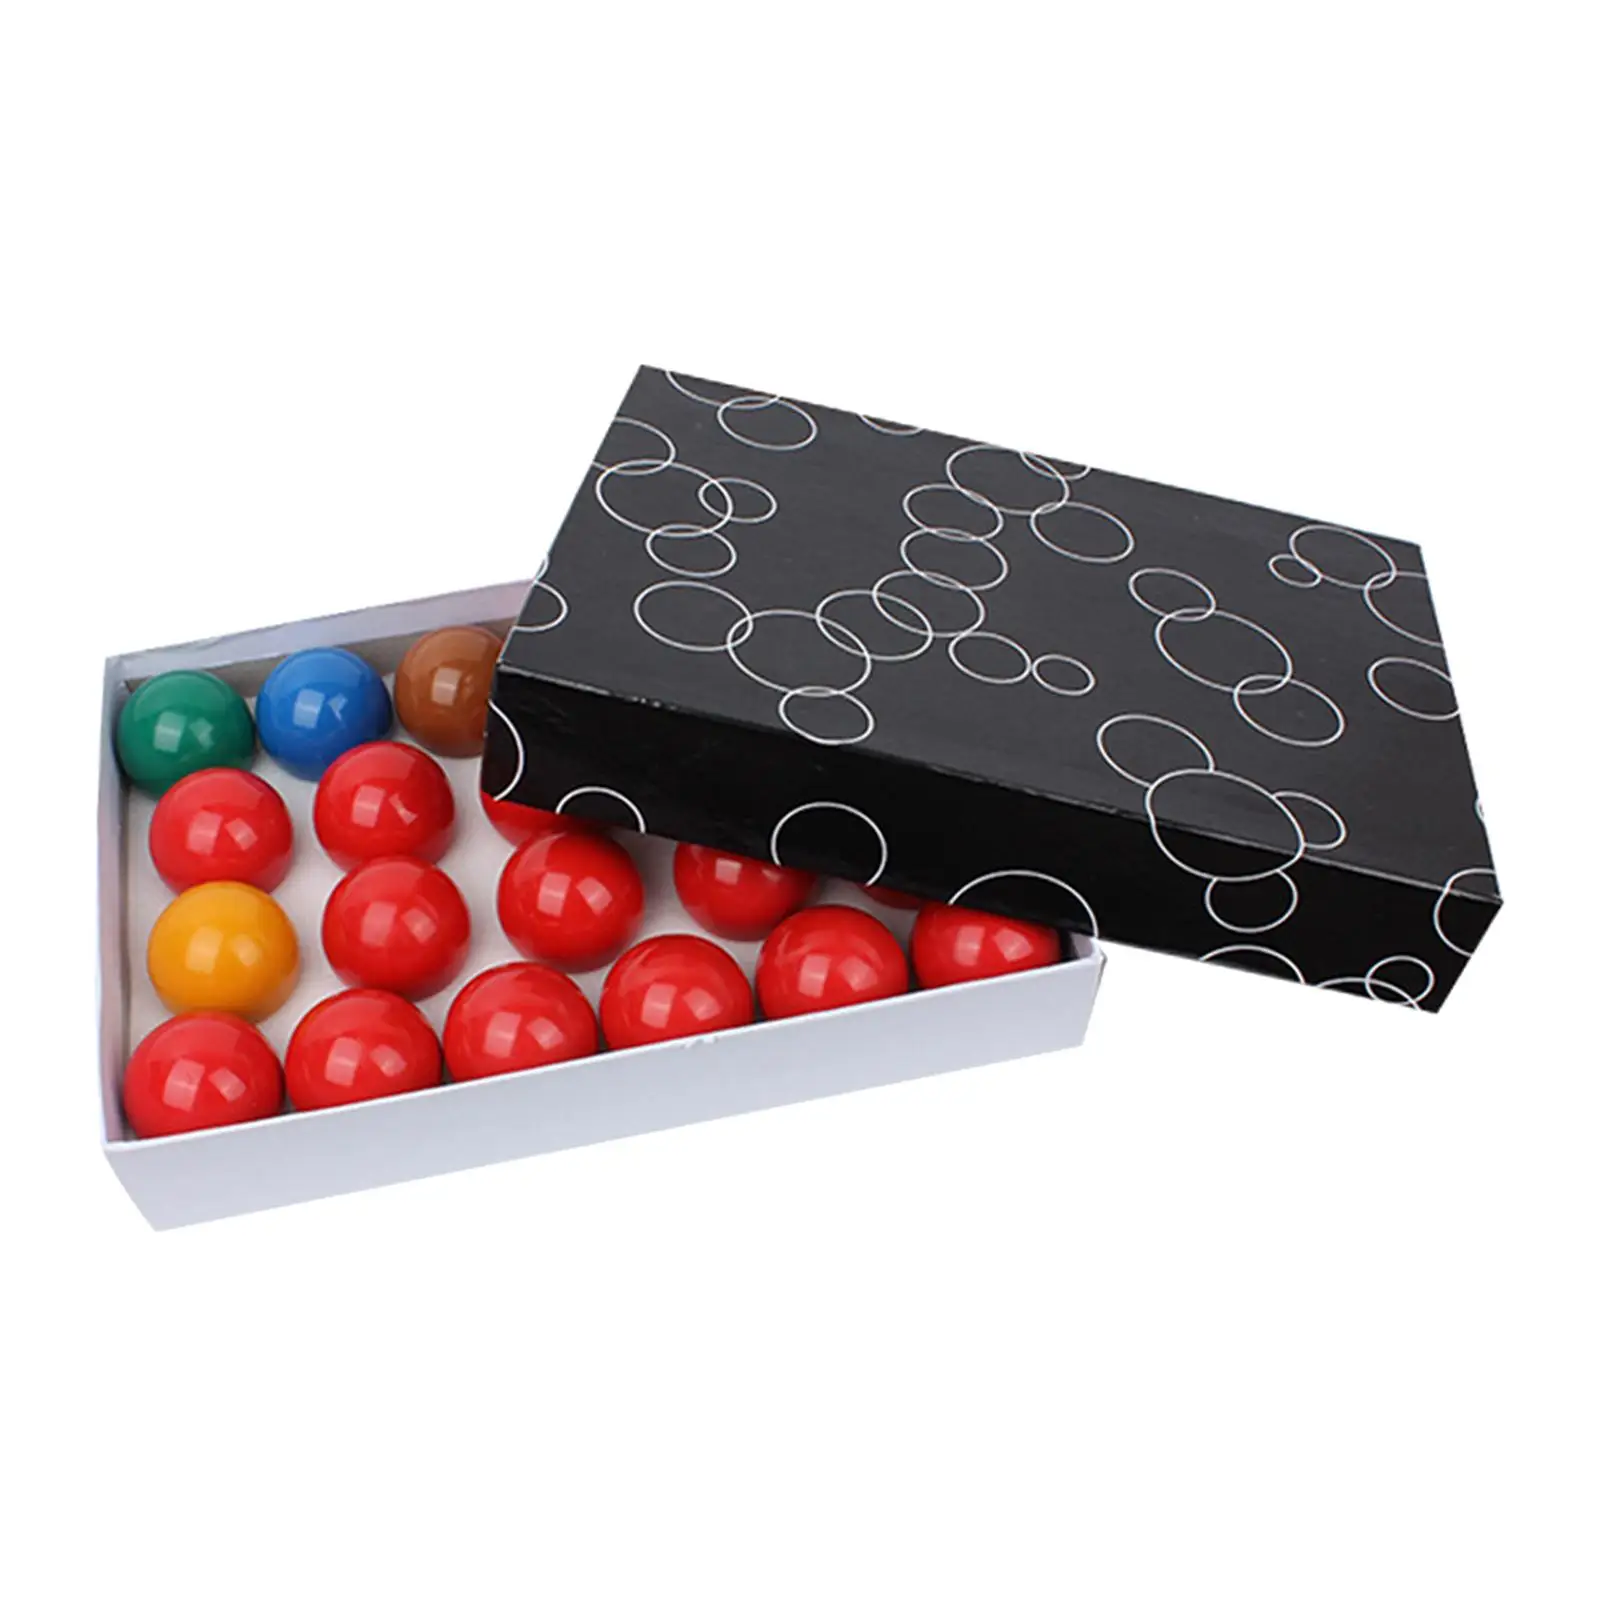 22 Pieces Professional Billiard Balls 50.8mm Resin Colorful Pool Table Balls